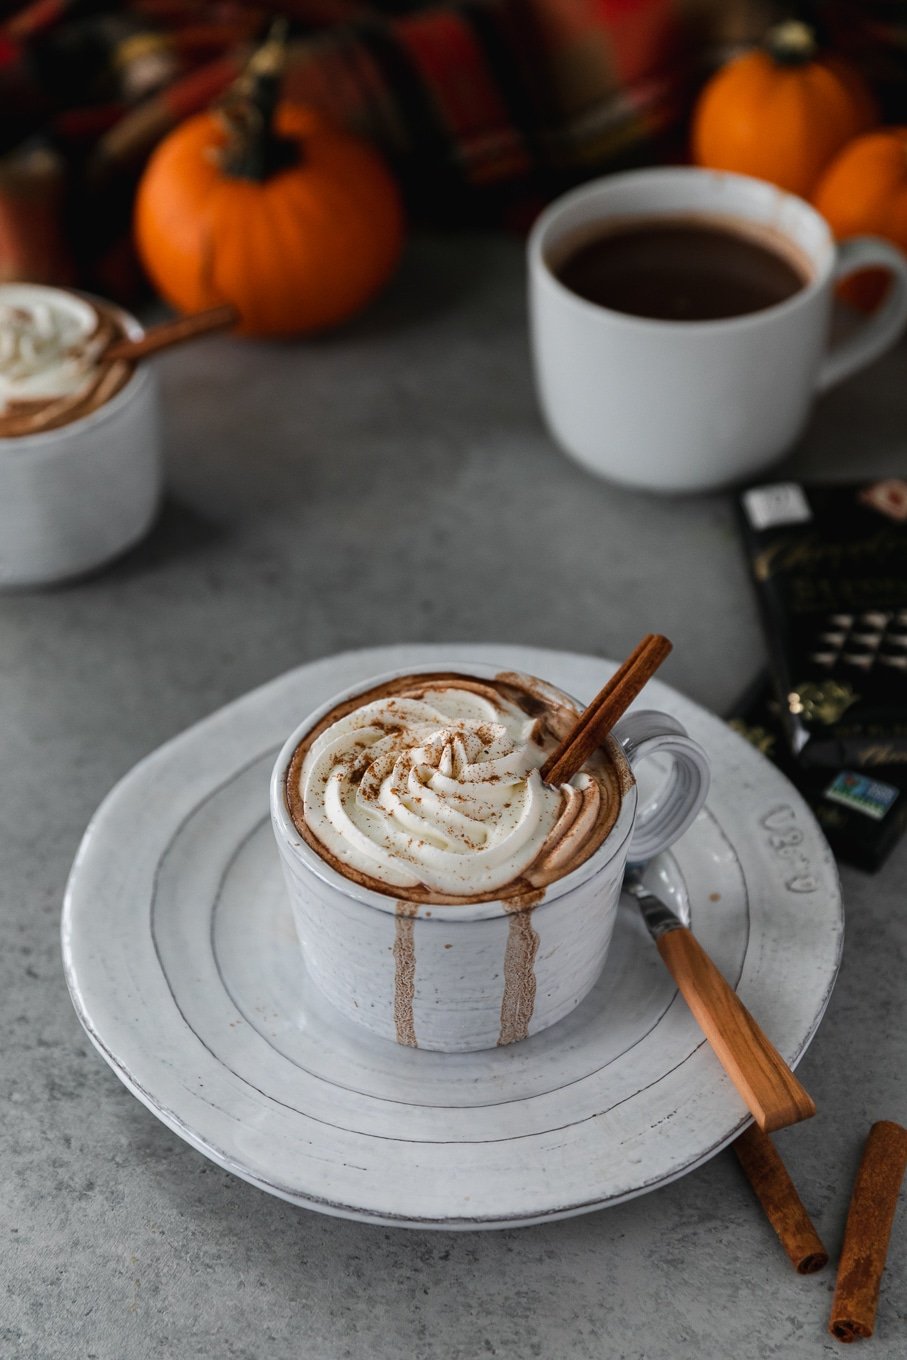 Spices in my DNA boozed pumpkin hot chocolate for the 24 days of pumpkin recipes collection